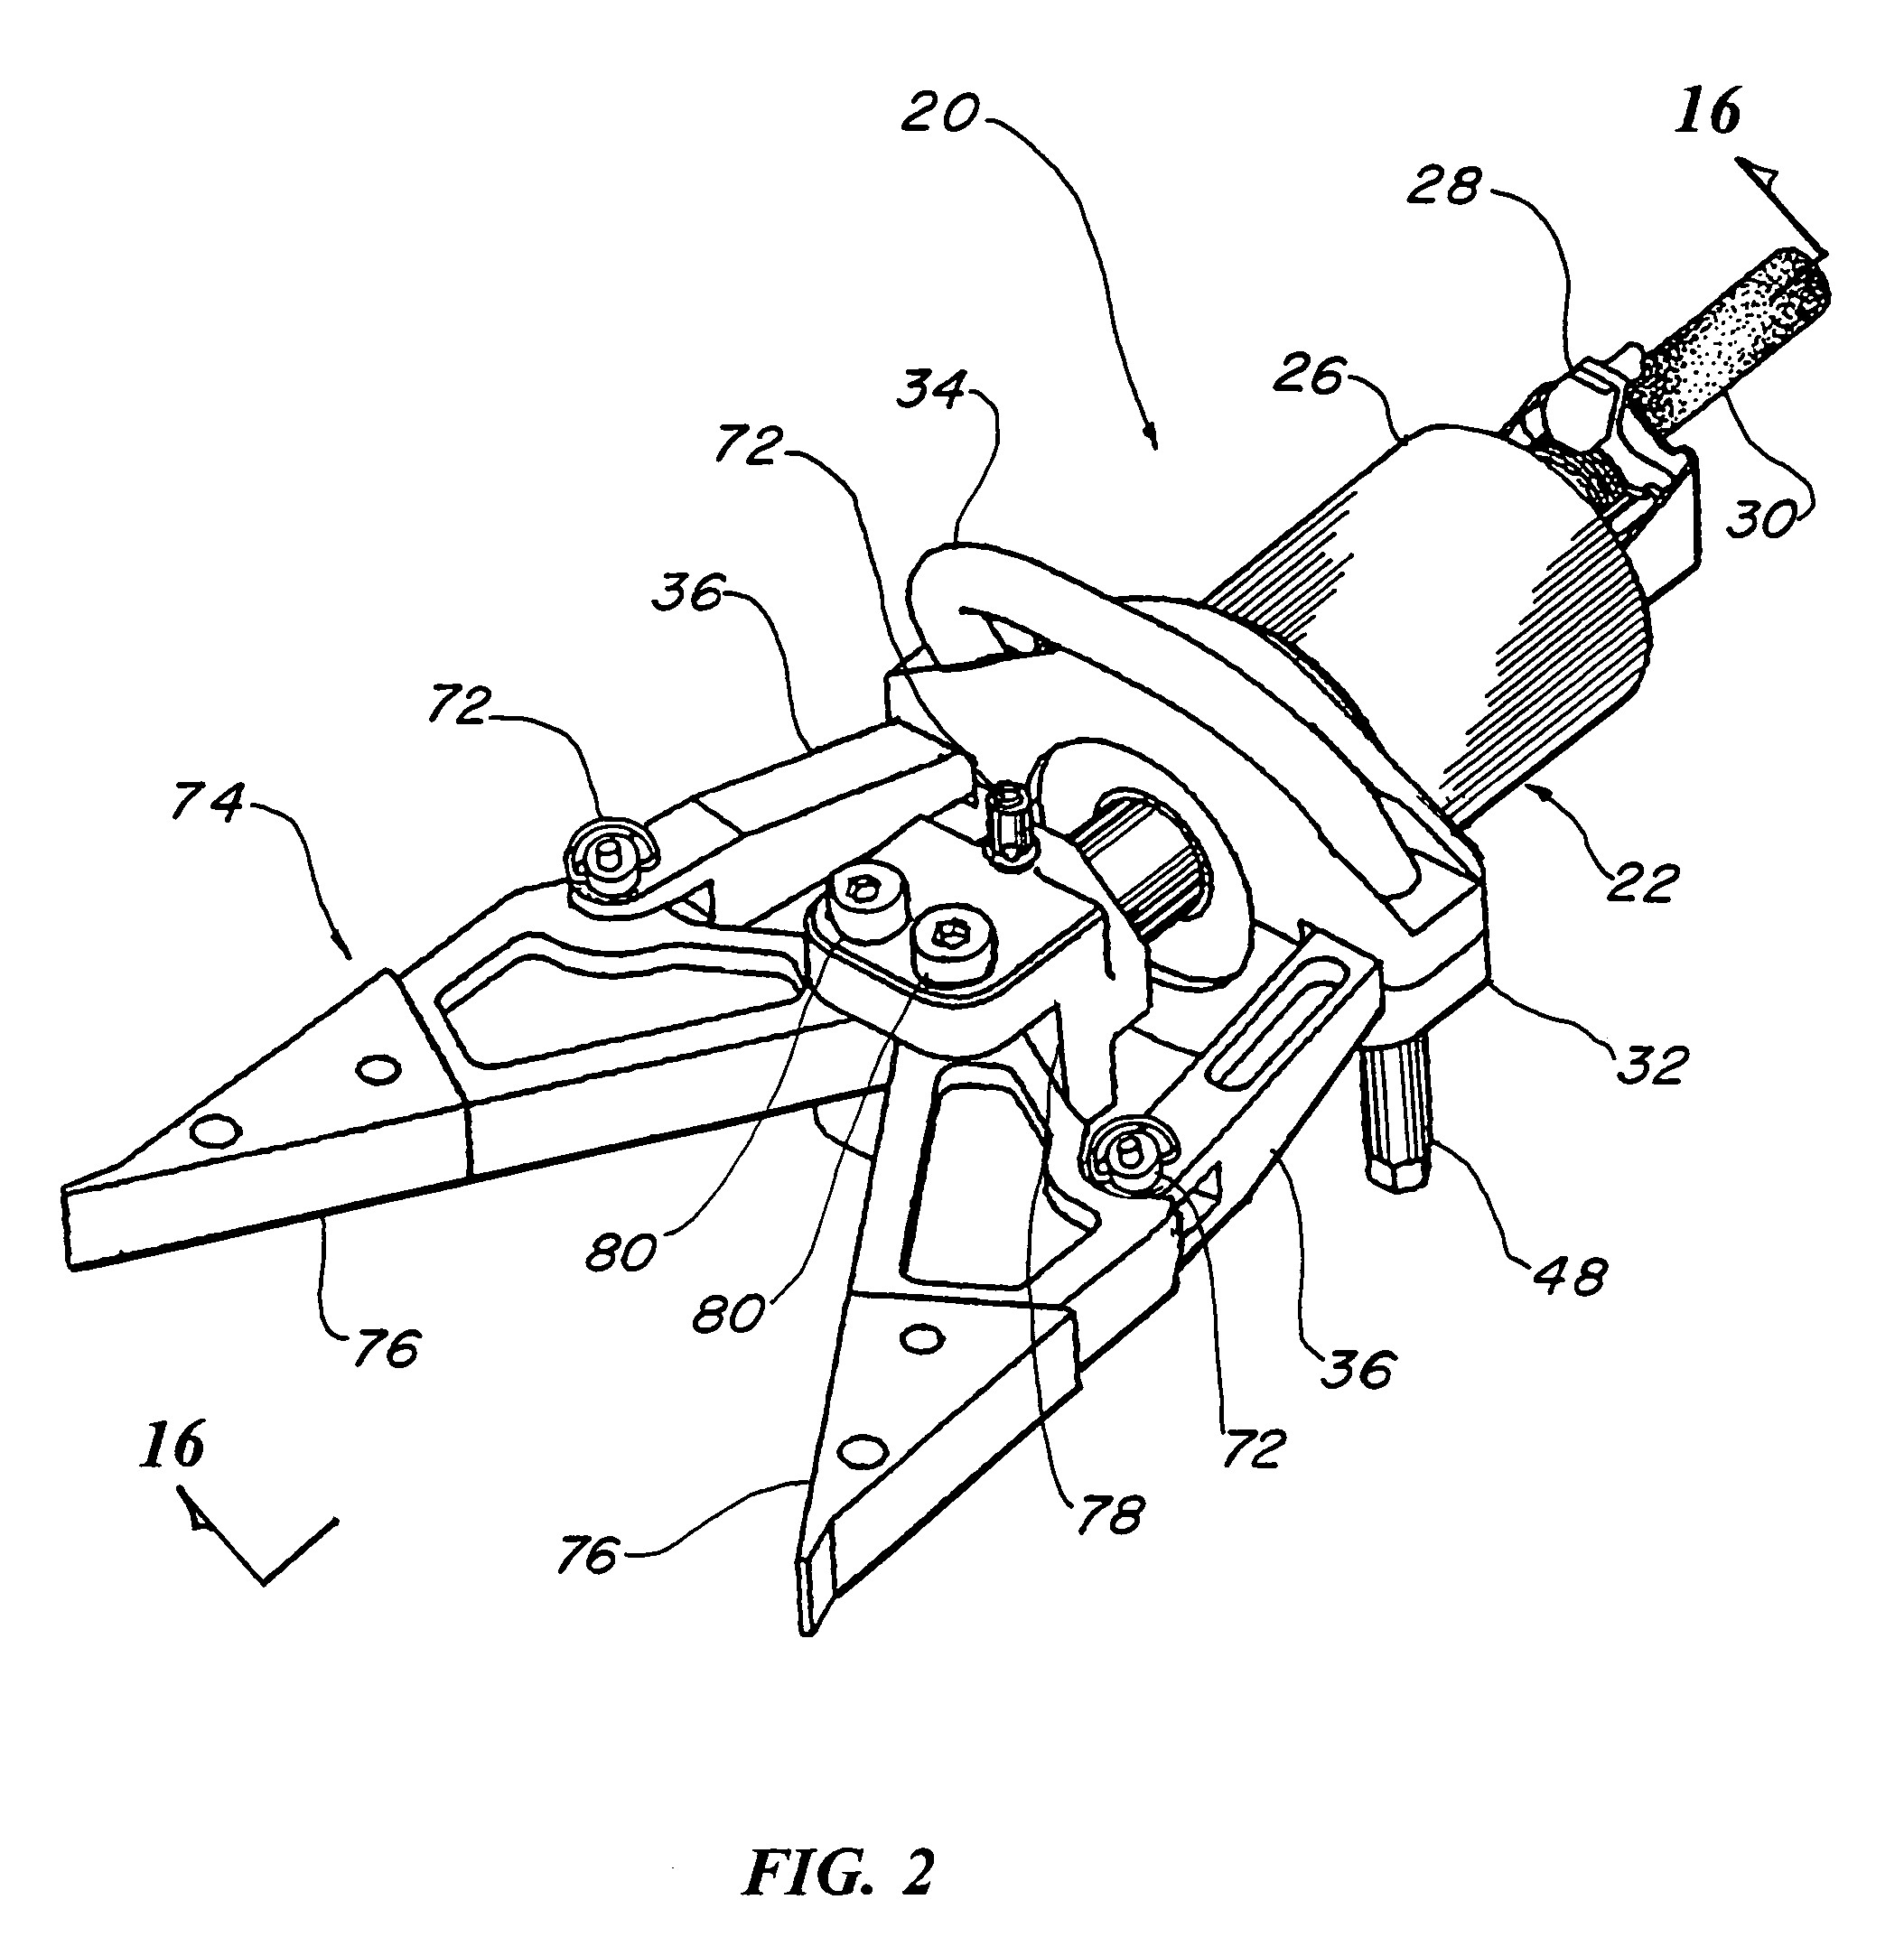 Oblique Technique Of Jaws Of Life Rescue System Patent Us Hydraulic Rescue tool Google Patents